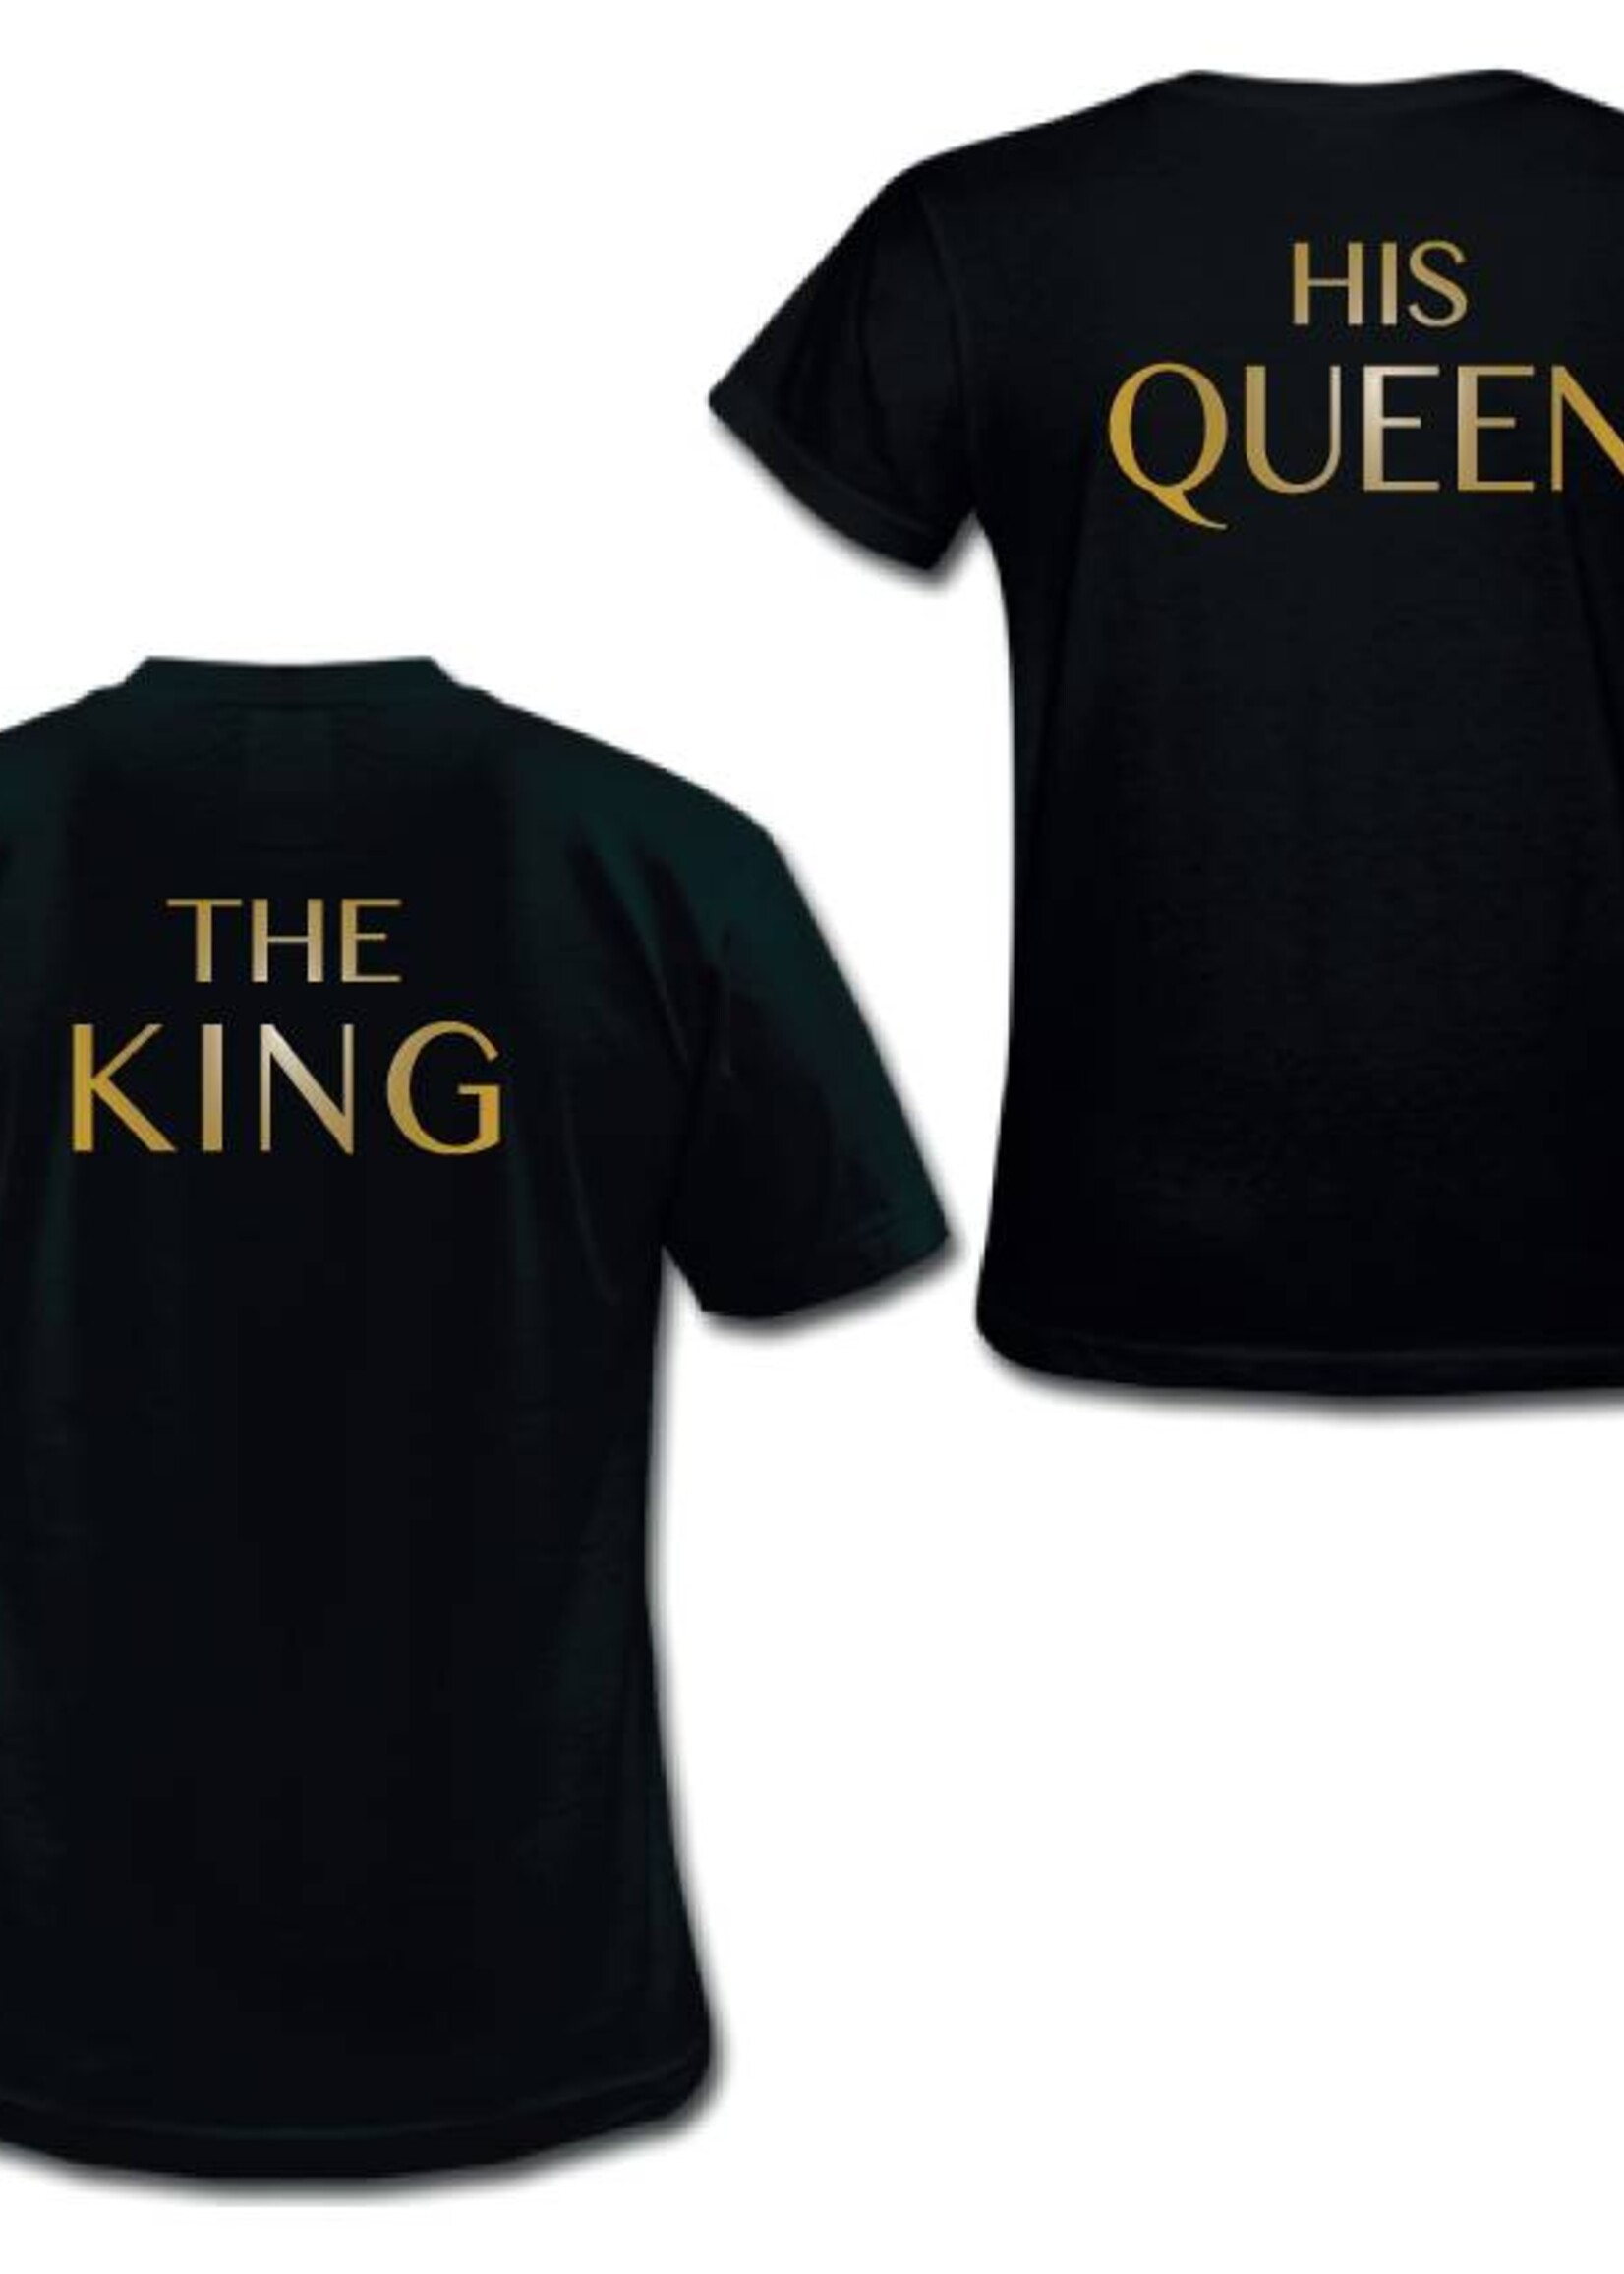 THE KING & HIS QUEEN COUPLE TEES GOLD EDITION